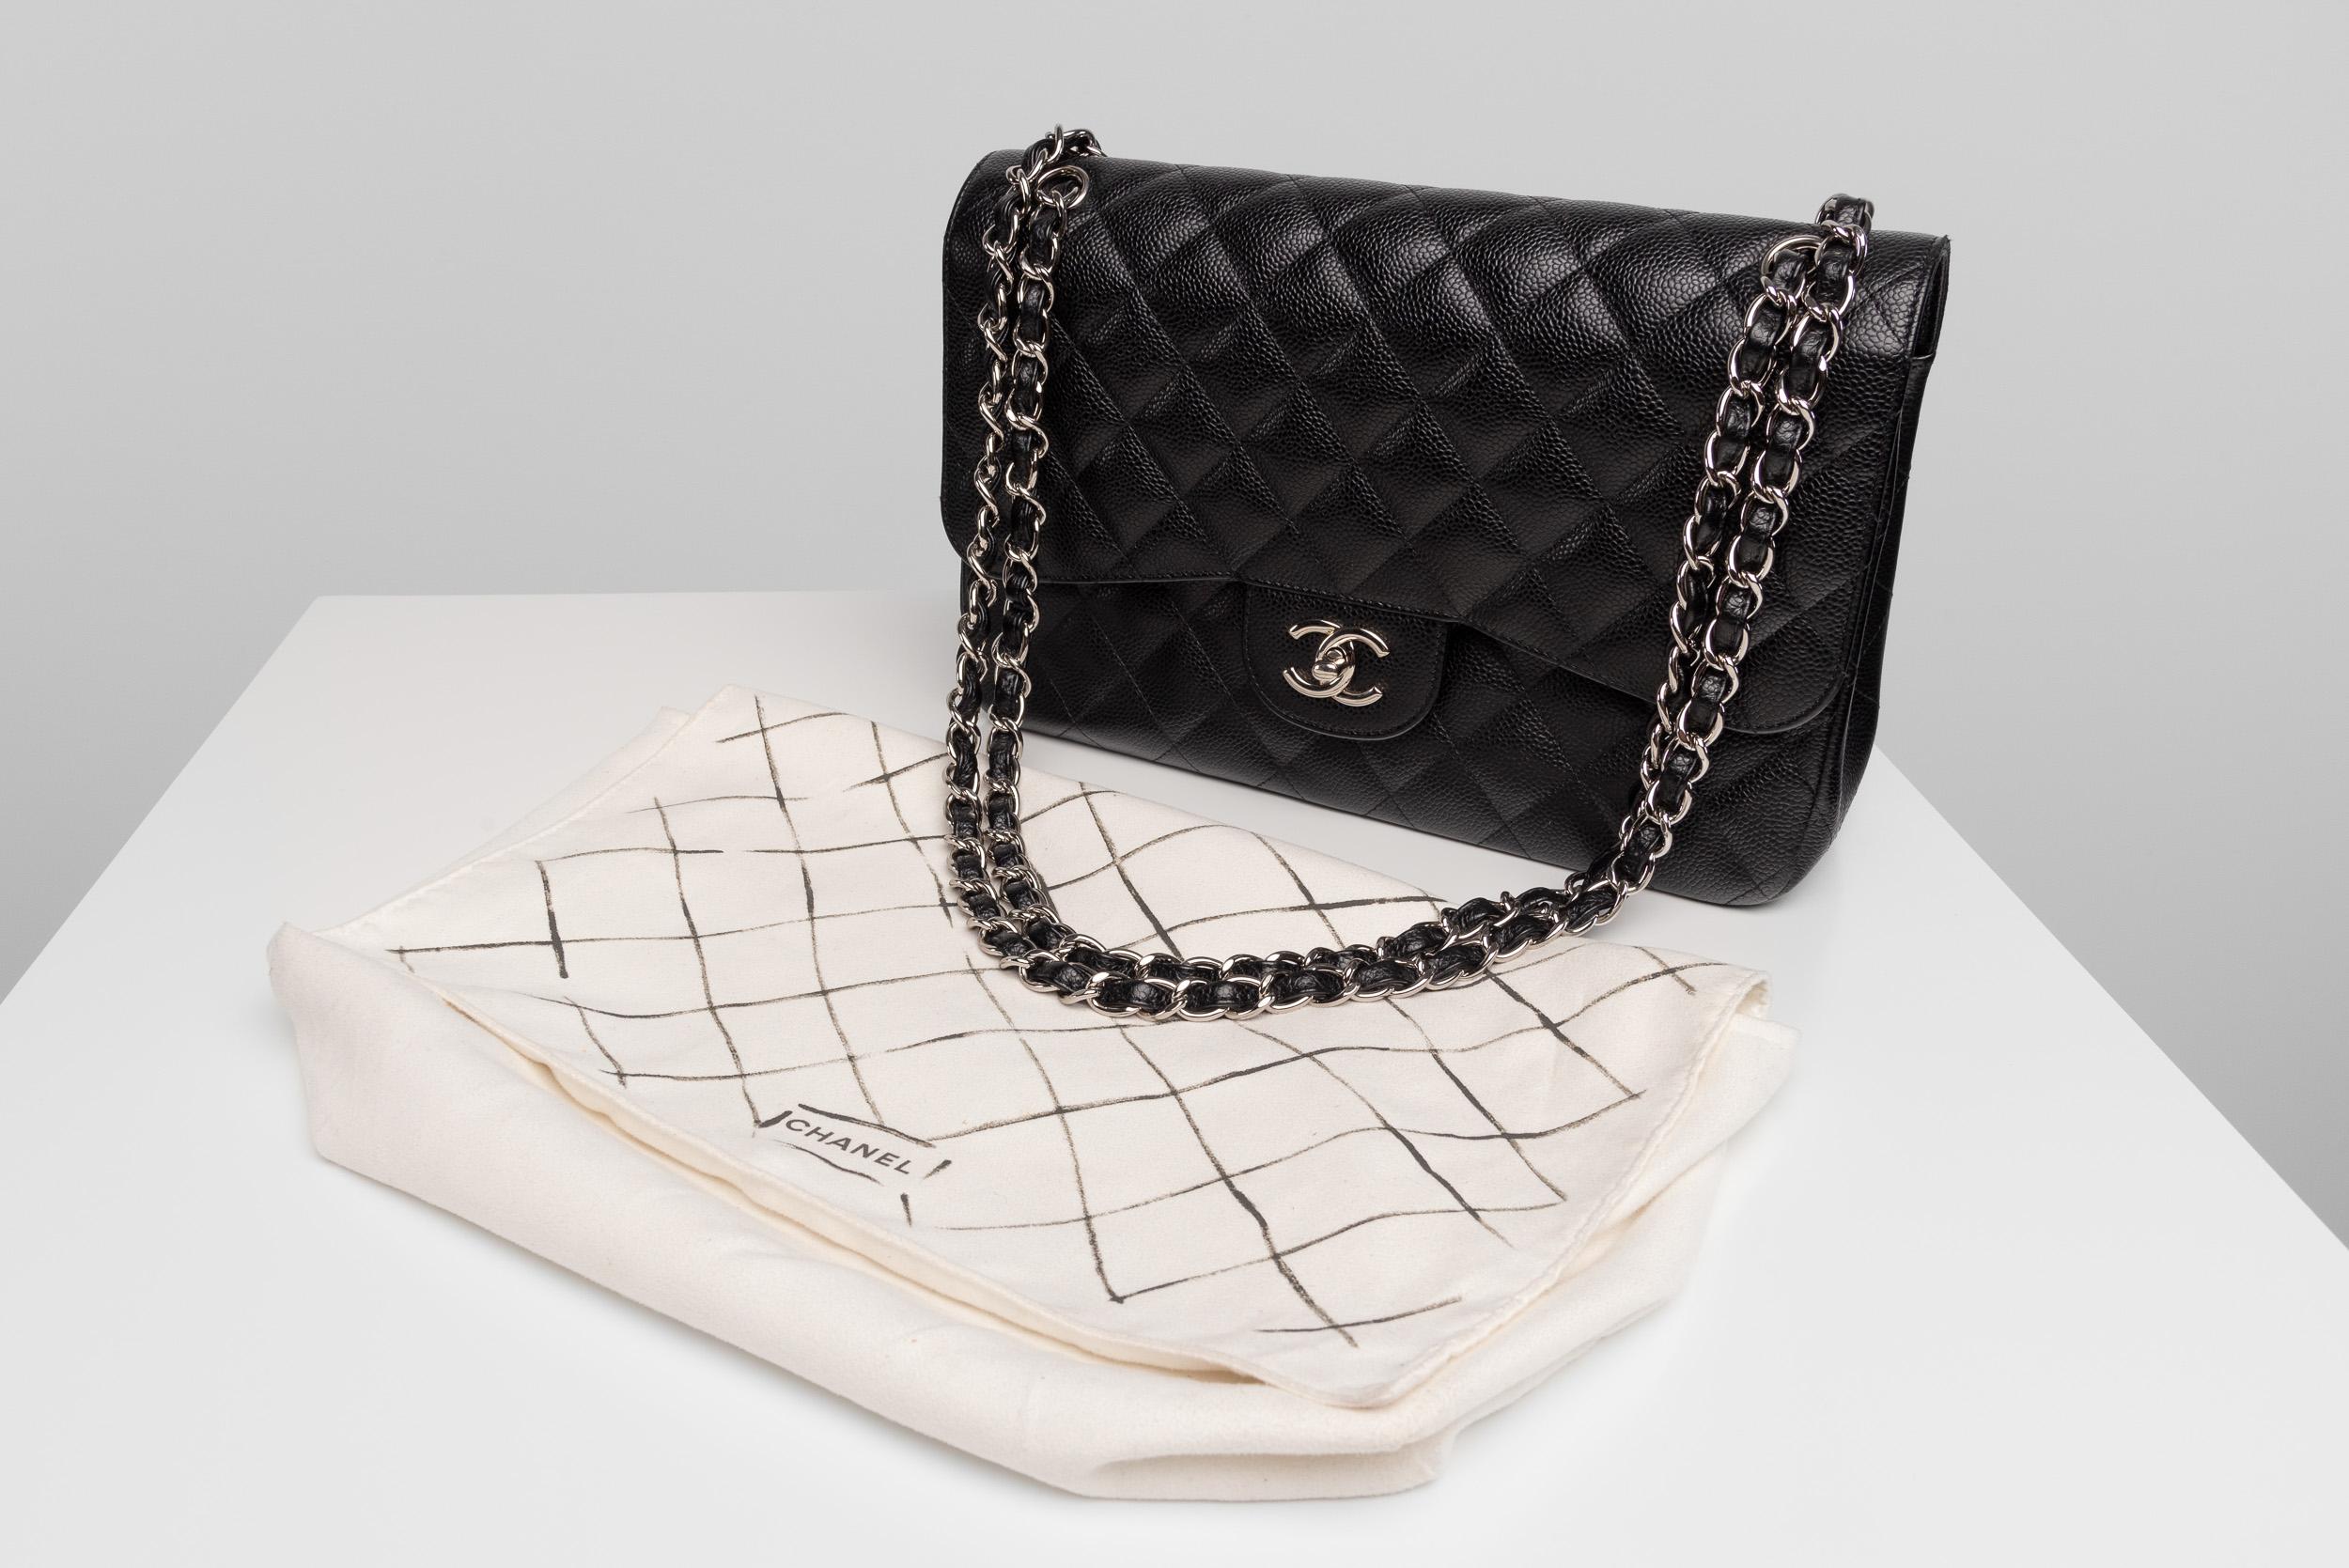 From the collection of SAVINETI we offer this Chanel Classic Flap Jumbo:
-	Brand: Chanel
-	Model: Classic Flap Jumbo Caviar
-	Year: 2014
-	Code: 18887879
-	Condition: Good (original condition, beautiful soft leather), very small signs of use on the